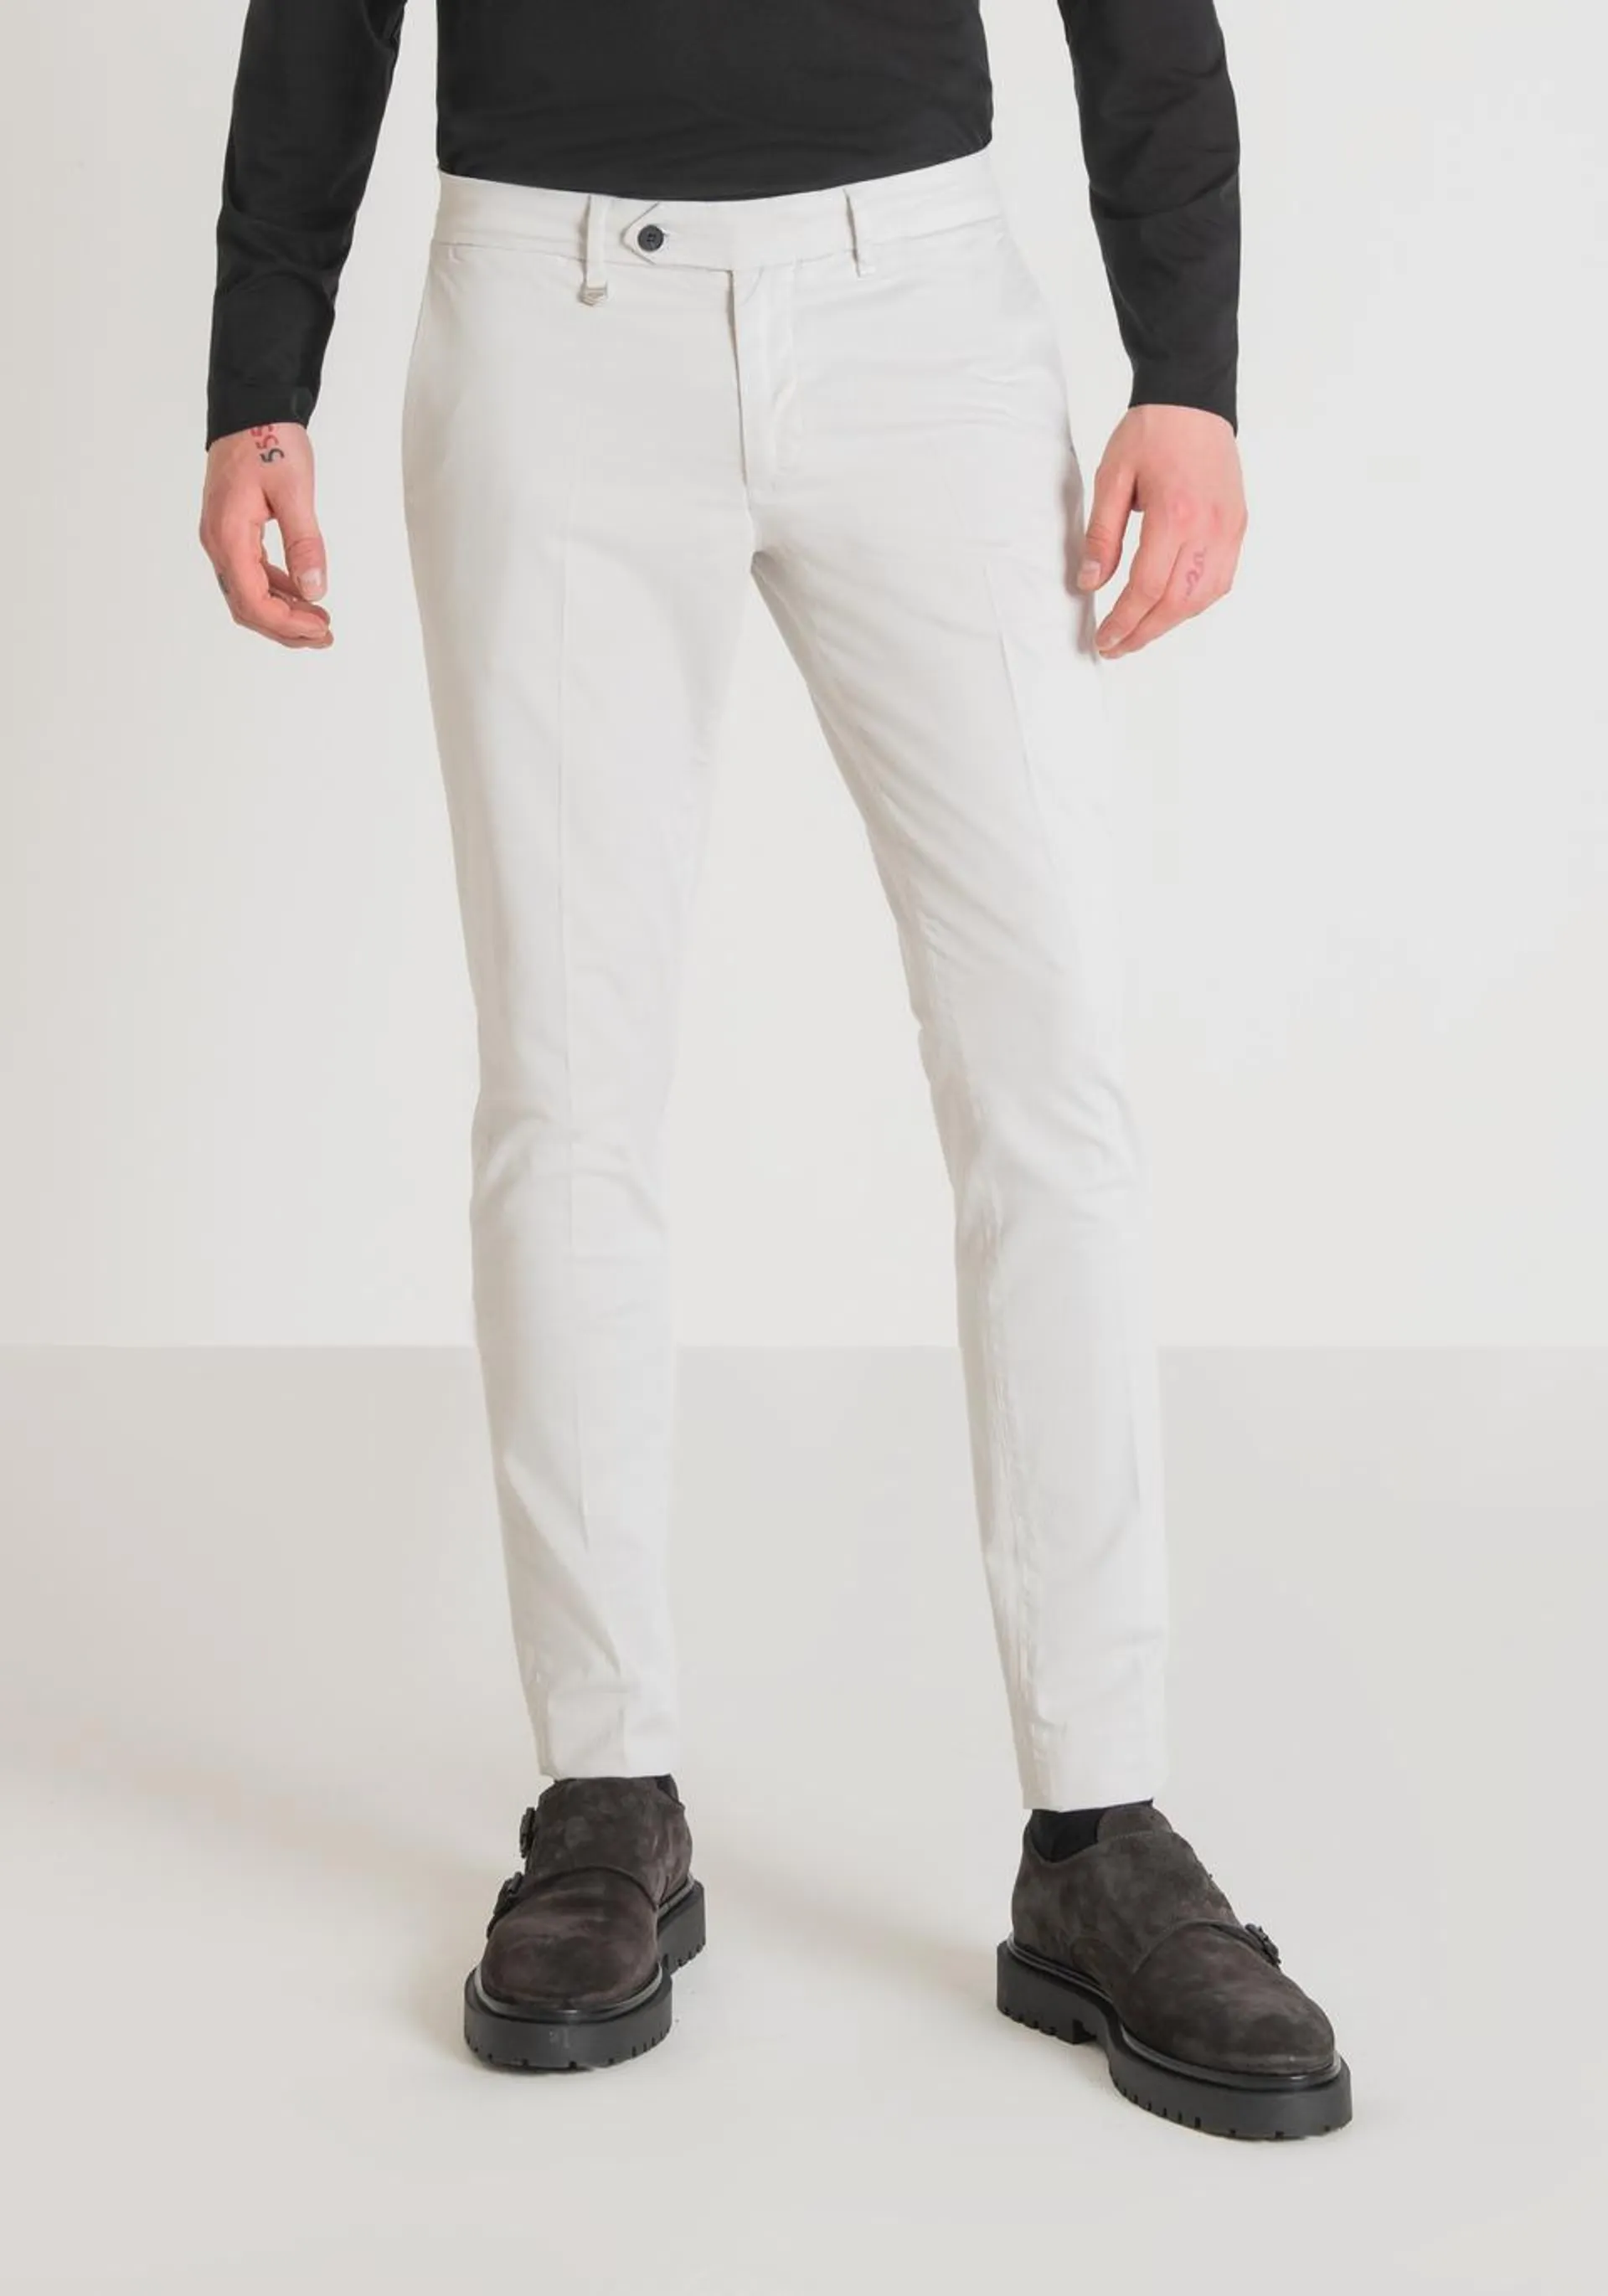 "BRYAN" SKINNY FIT TROUSERS IN SOFT MICRO-WEAVE STRETCH COTTON